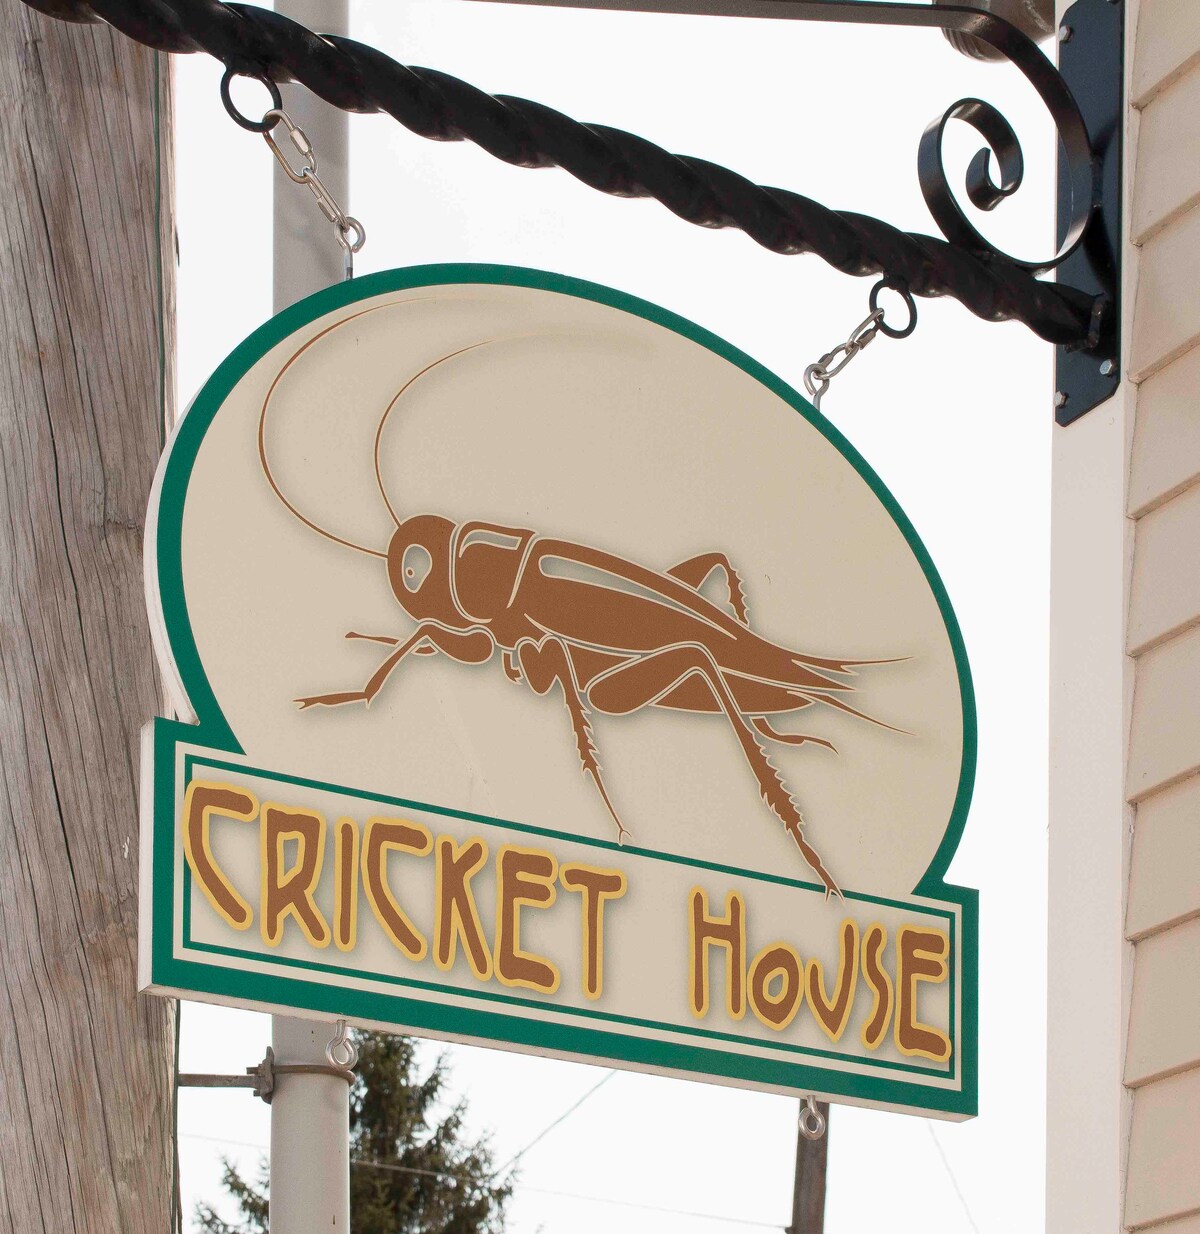 Cricket House - cozy two bedroom house in downtown